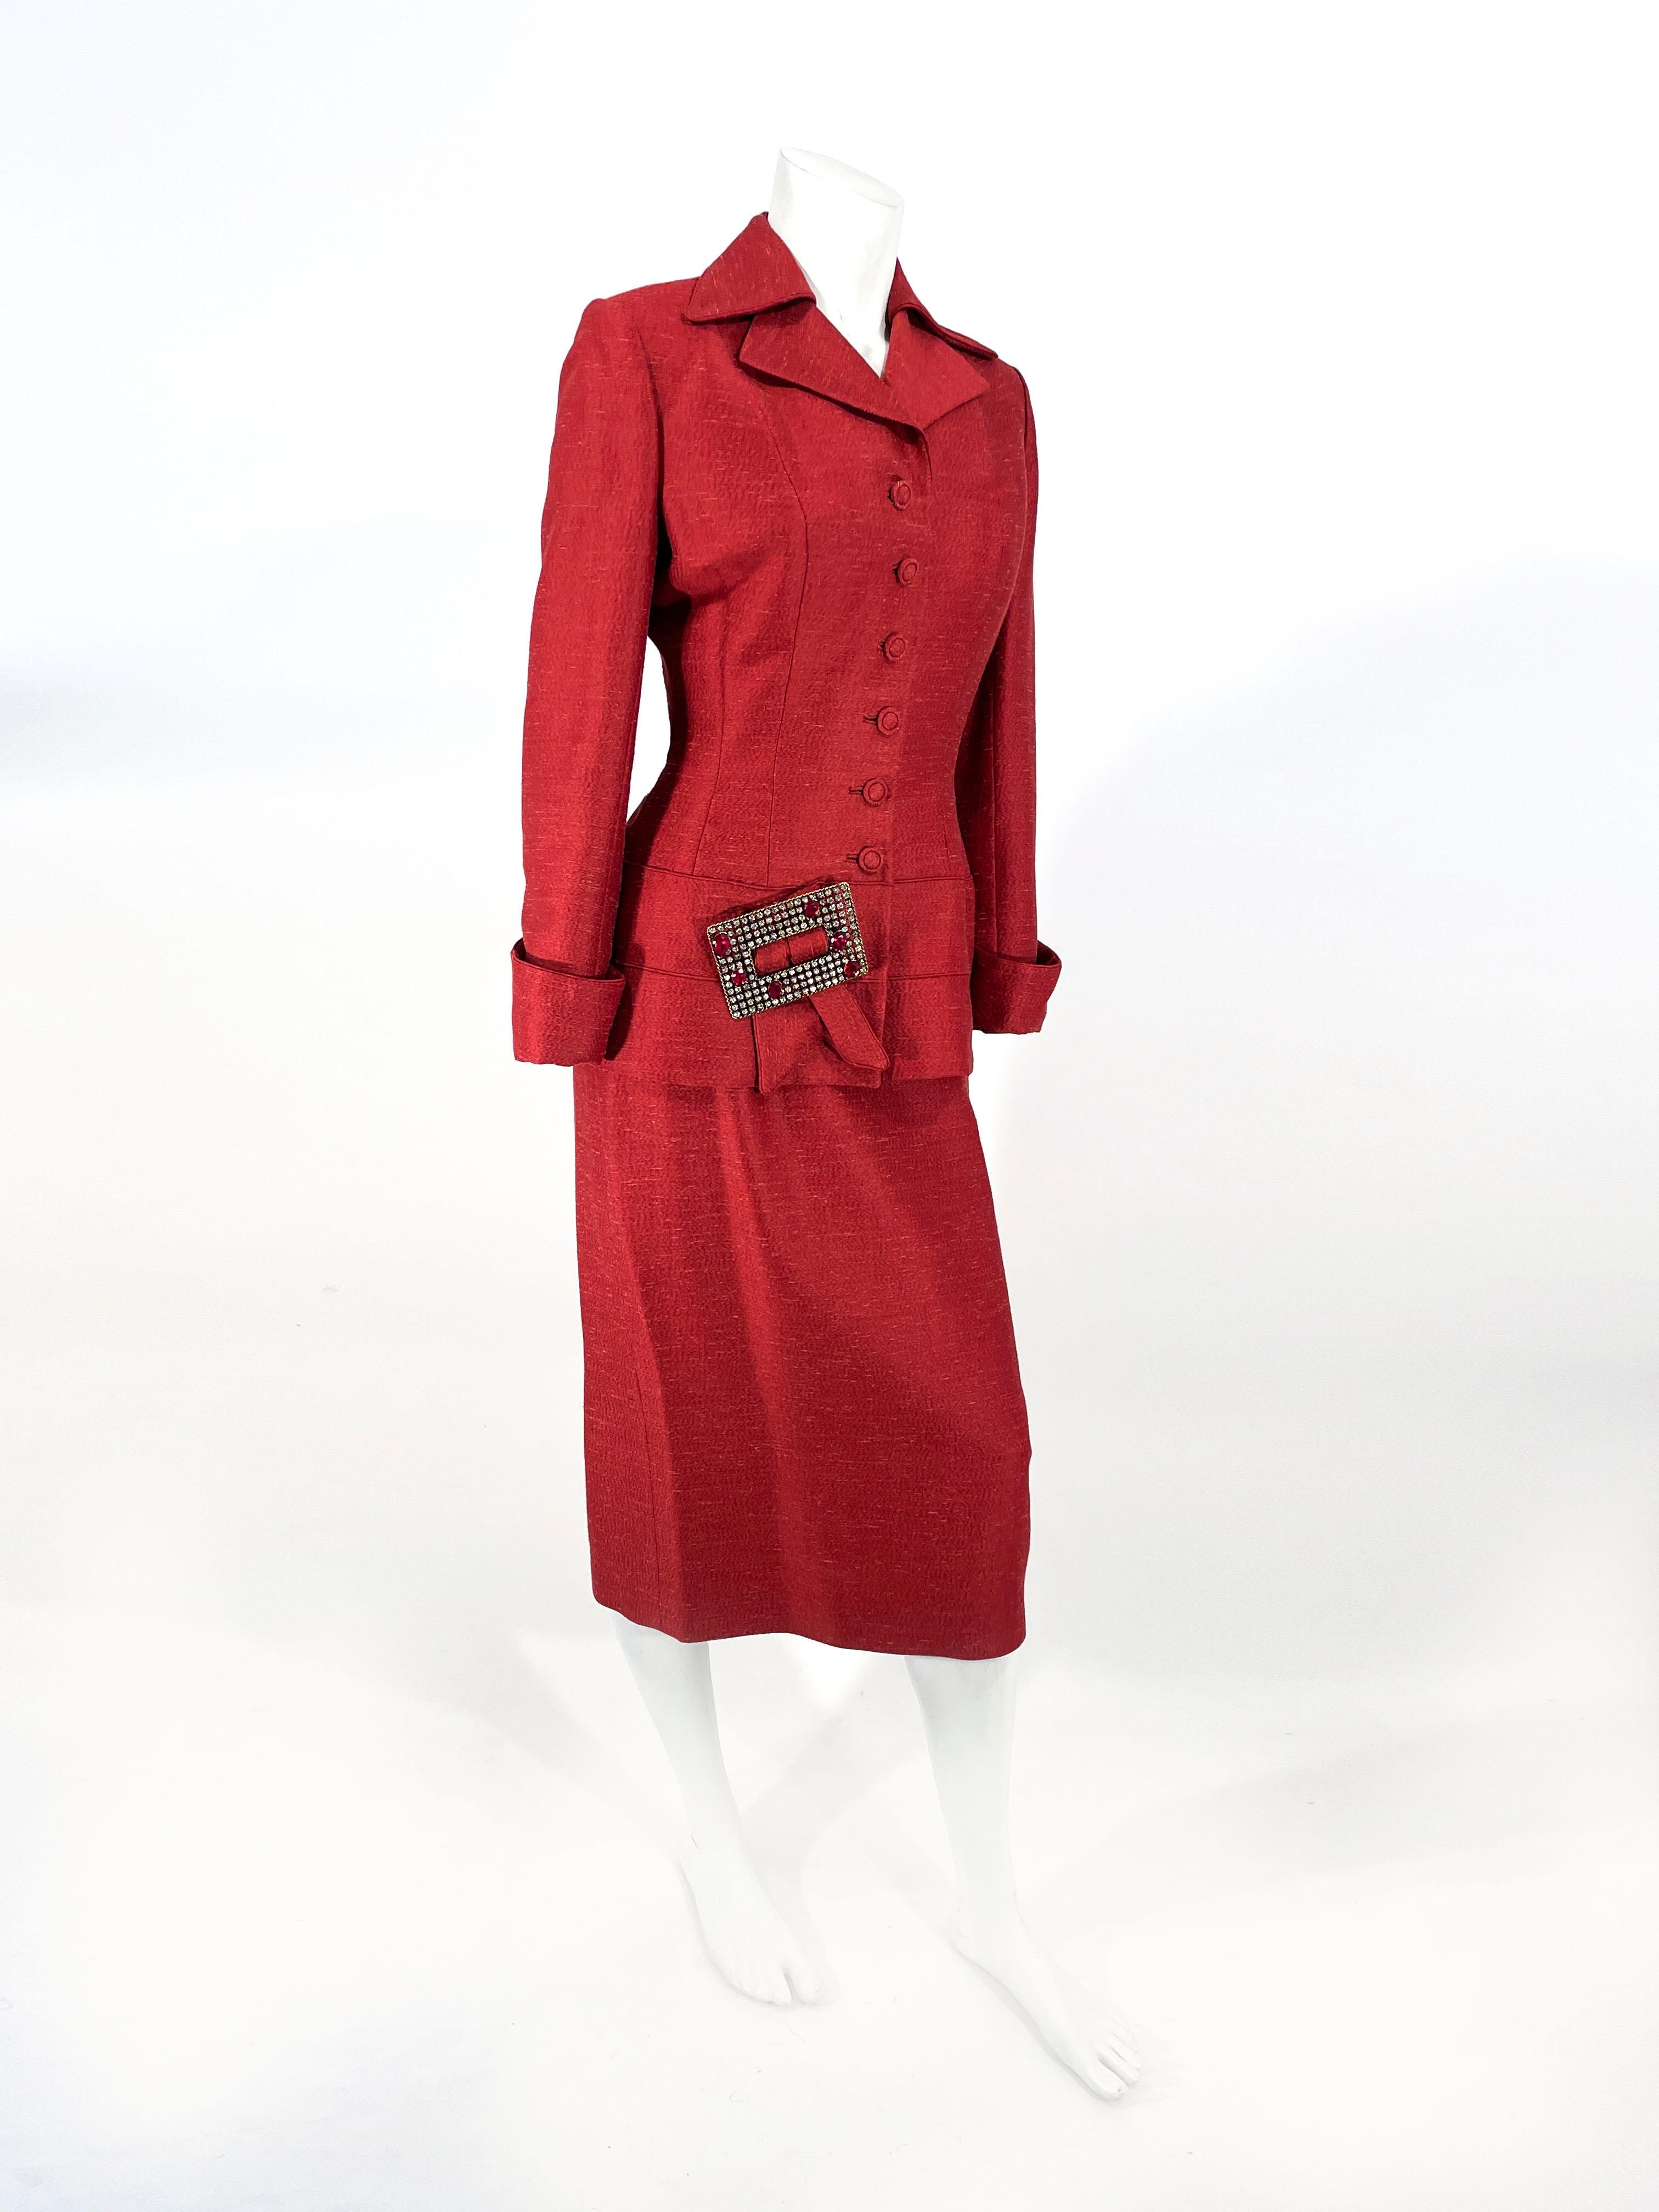 1950s Red Lilli Ann Suit with Rhinestone Buckle Accent In Good Condition For Sale In San Francisco, CA